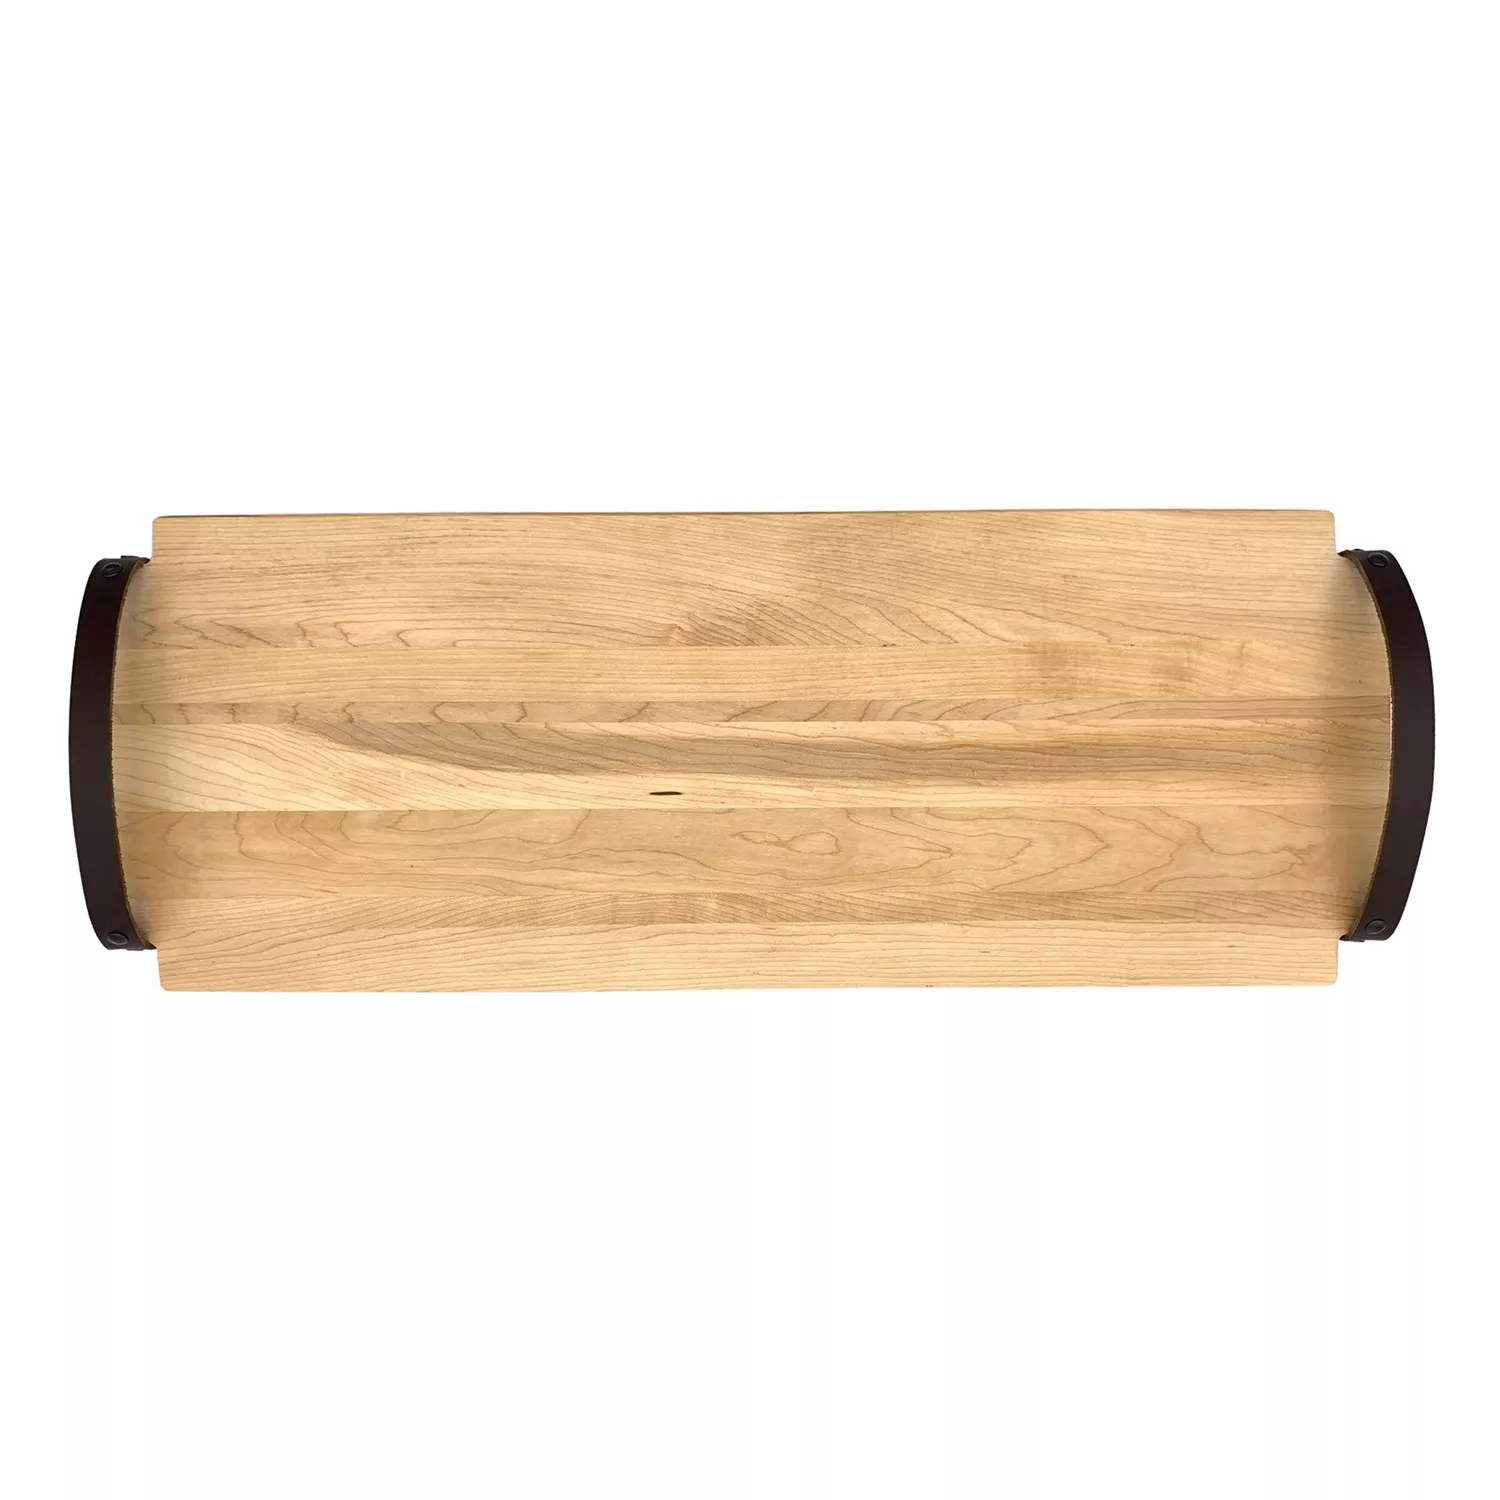 J.K. Adams Maple Serving Board with Leather Handles, 24" X 9"